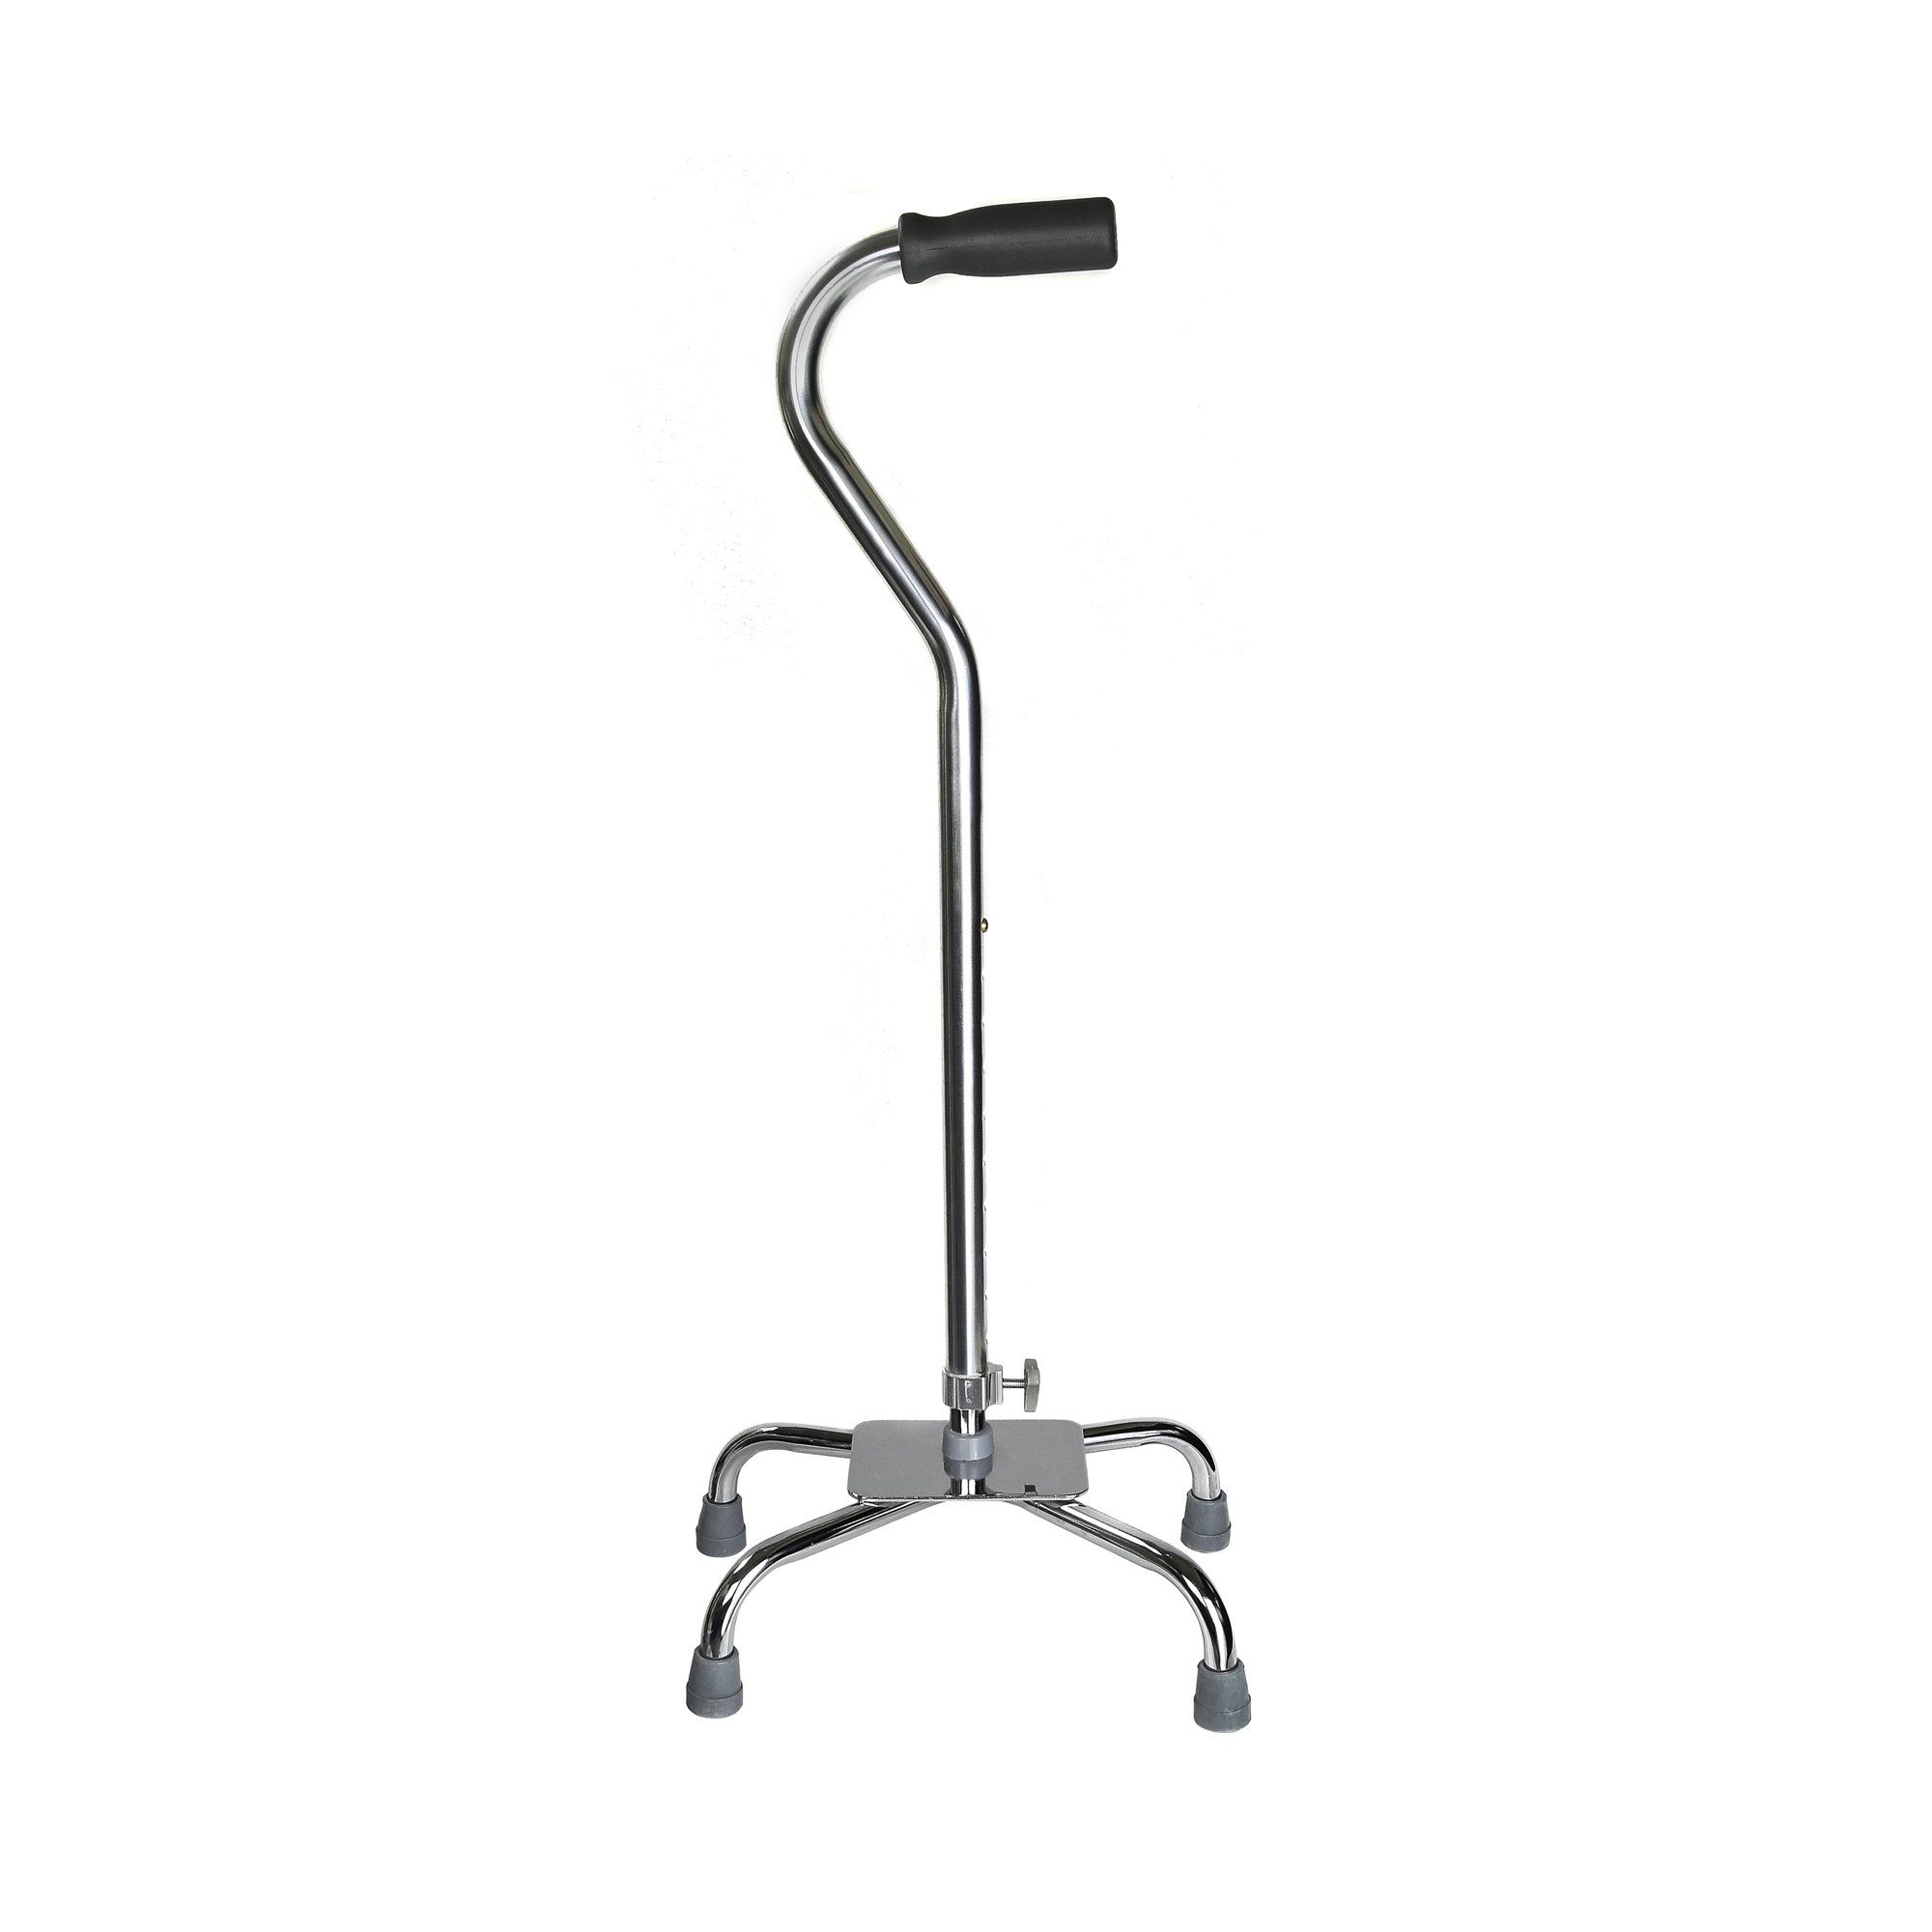 McKesson Chrome Steel Large Base Quad Cane, Adjustable Height 29" - 37.5" - 300 lb Weight Capacity